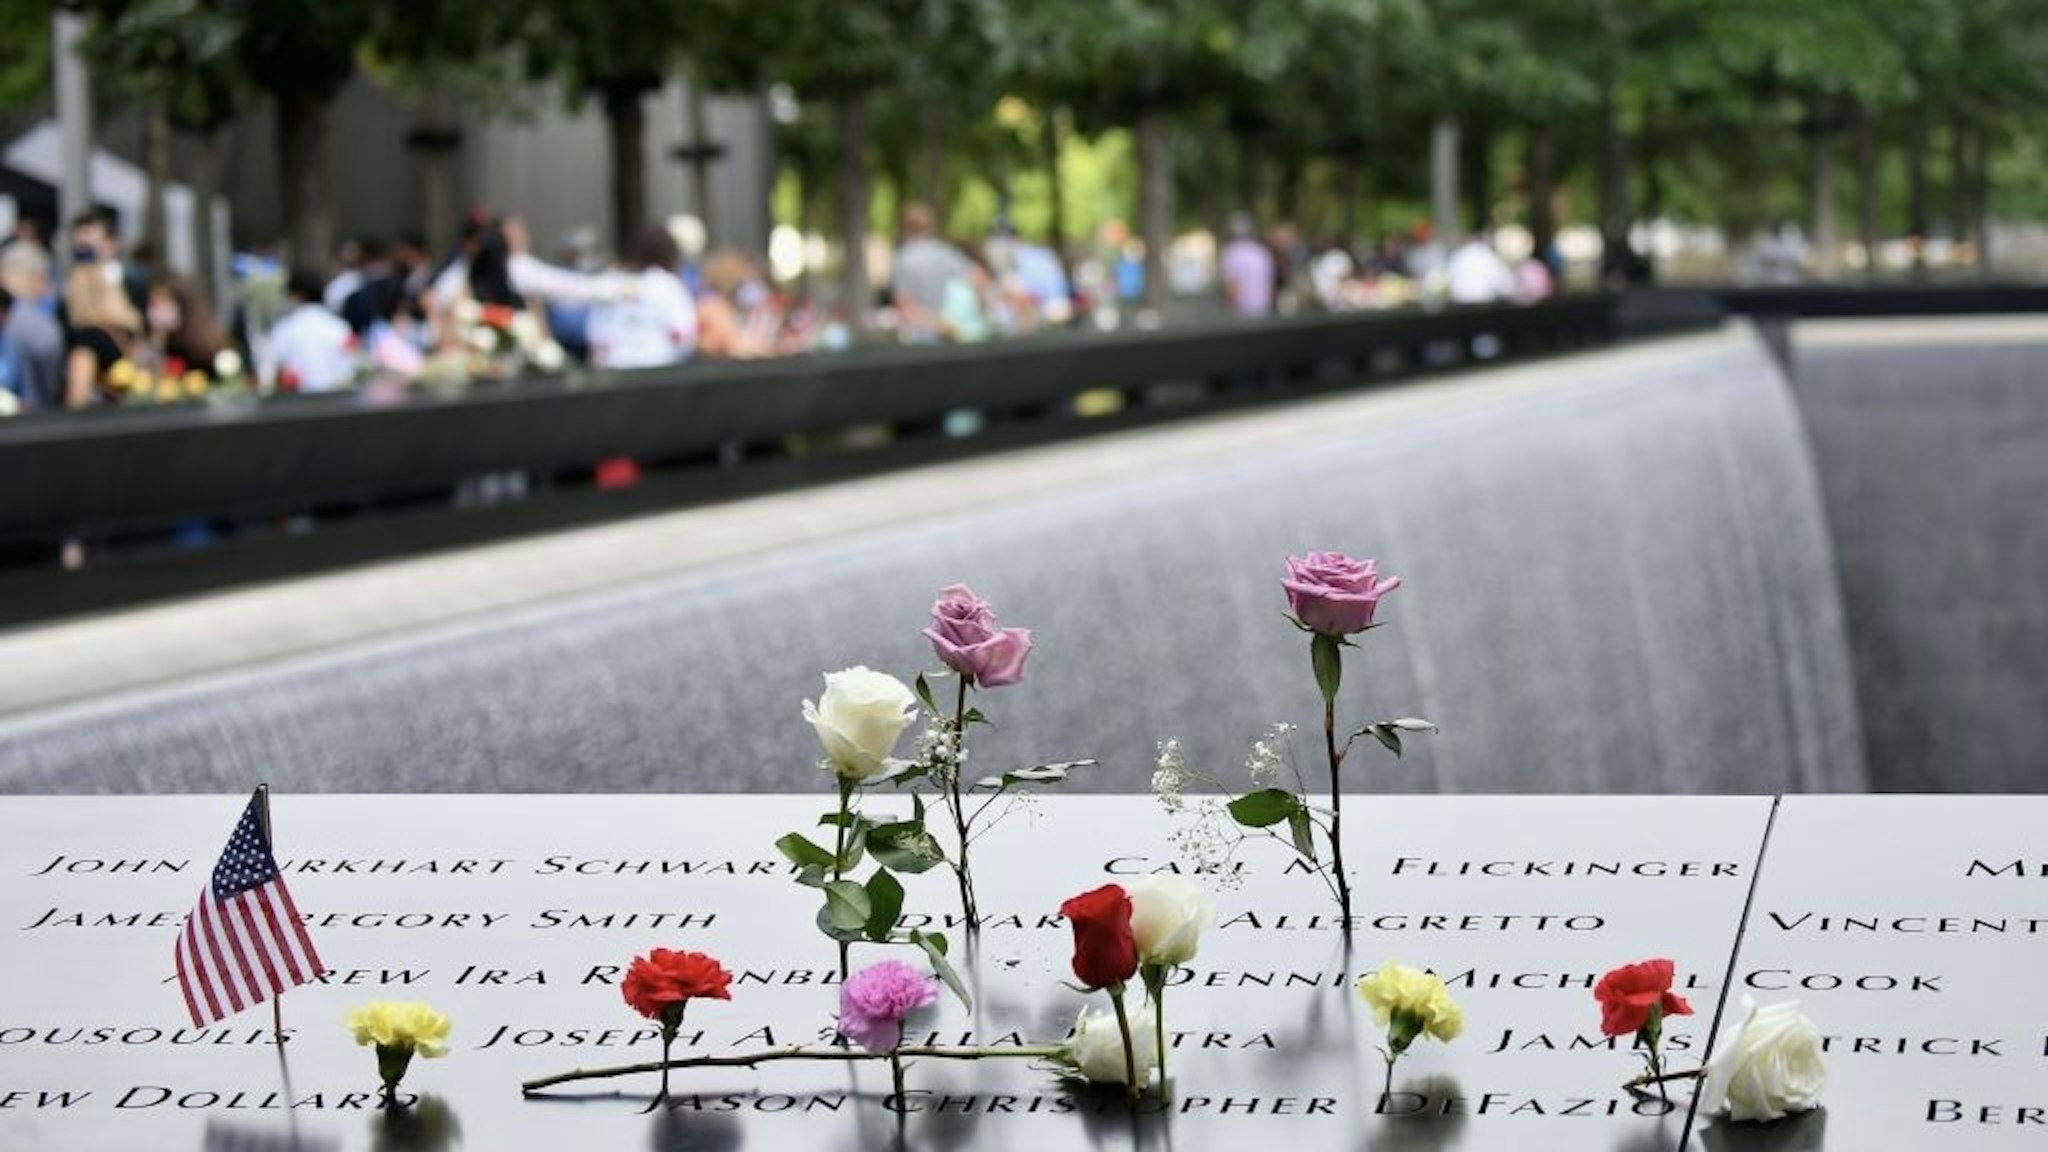 US-ATTACKS-9/11-ANNIVERSARY Mourners gather at the 9/11 Memorial & Museum in New York on September 11, 2020, as the US commemorates the 19th anniversary of the 9/11 attacks. (Photo by Angela Weiss / AFP) (Photo by ANGELA WEISS/AFP via Getty Images) ANGELA WEISS / Contributor via Getty Images